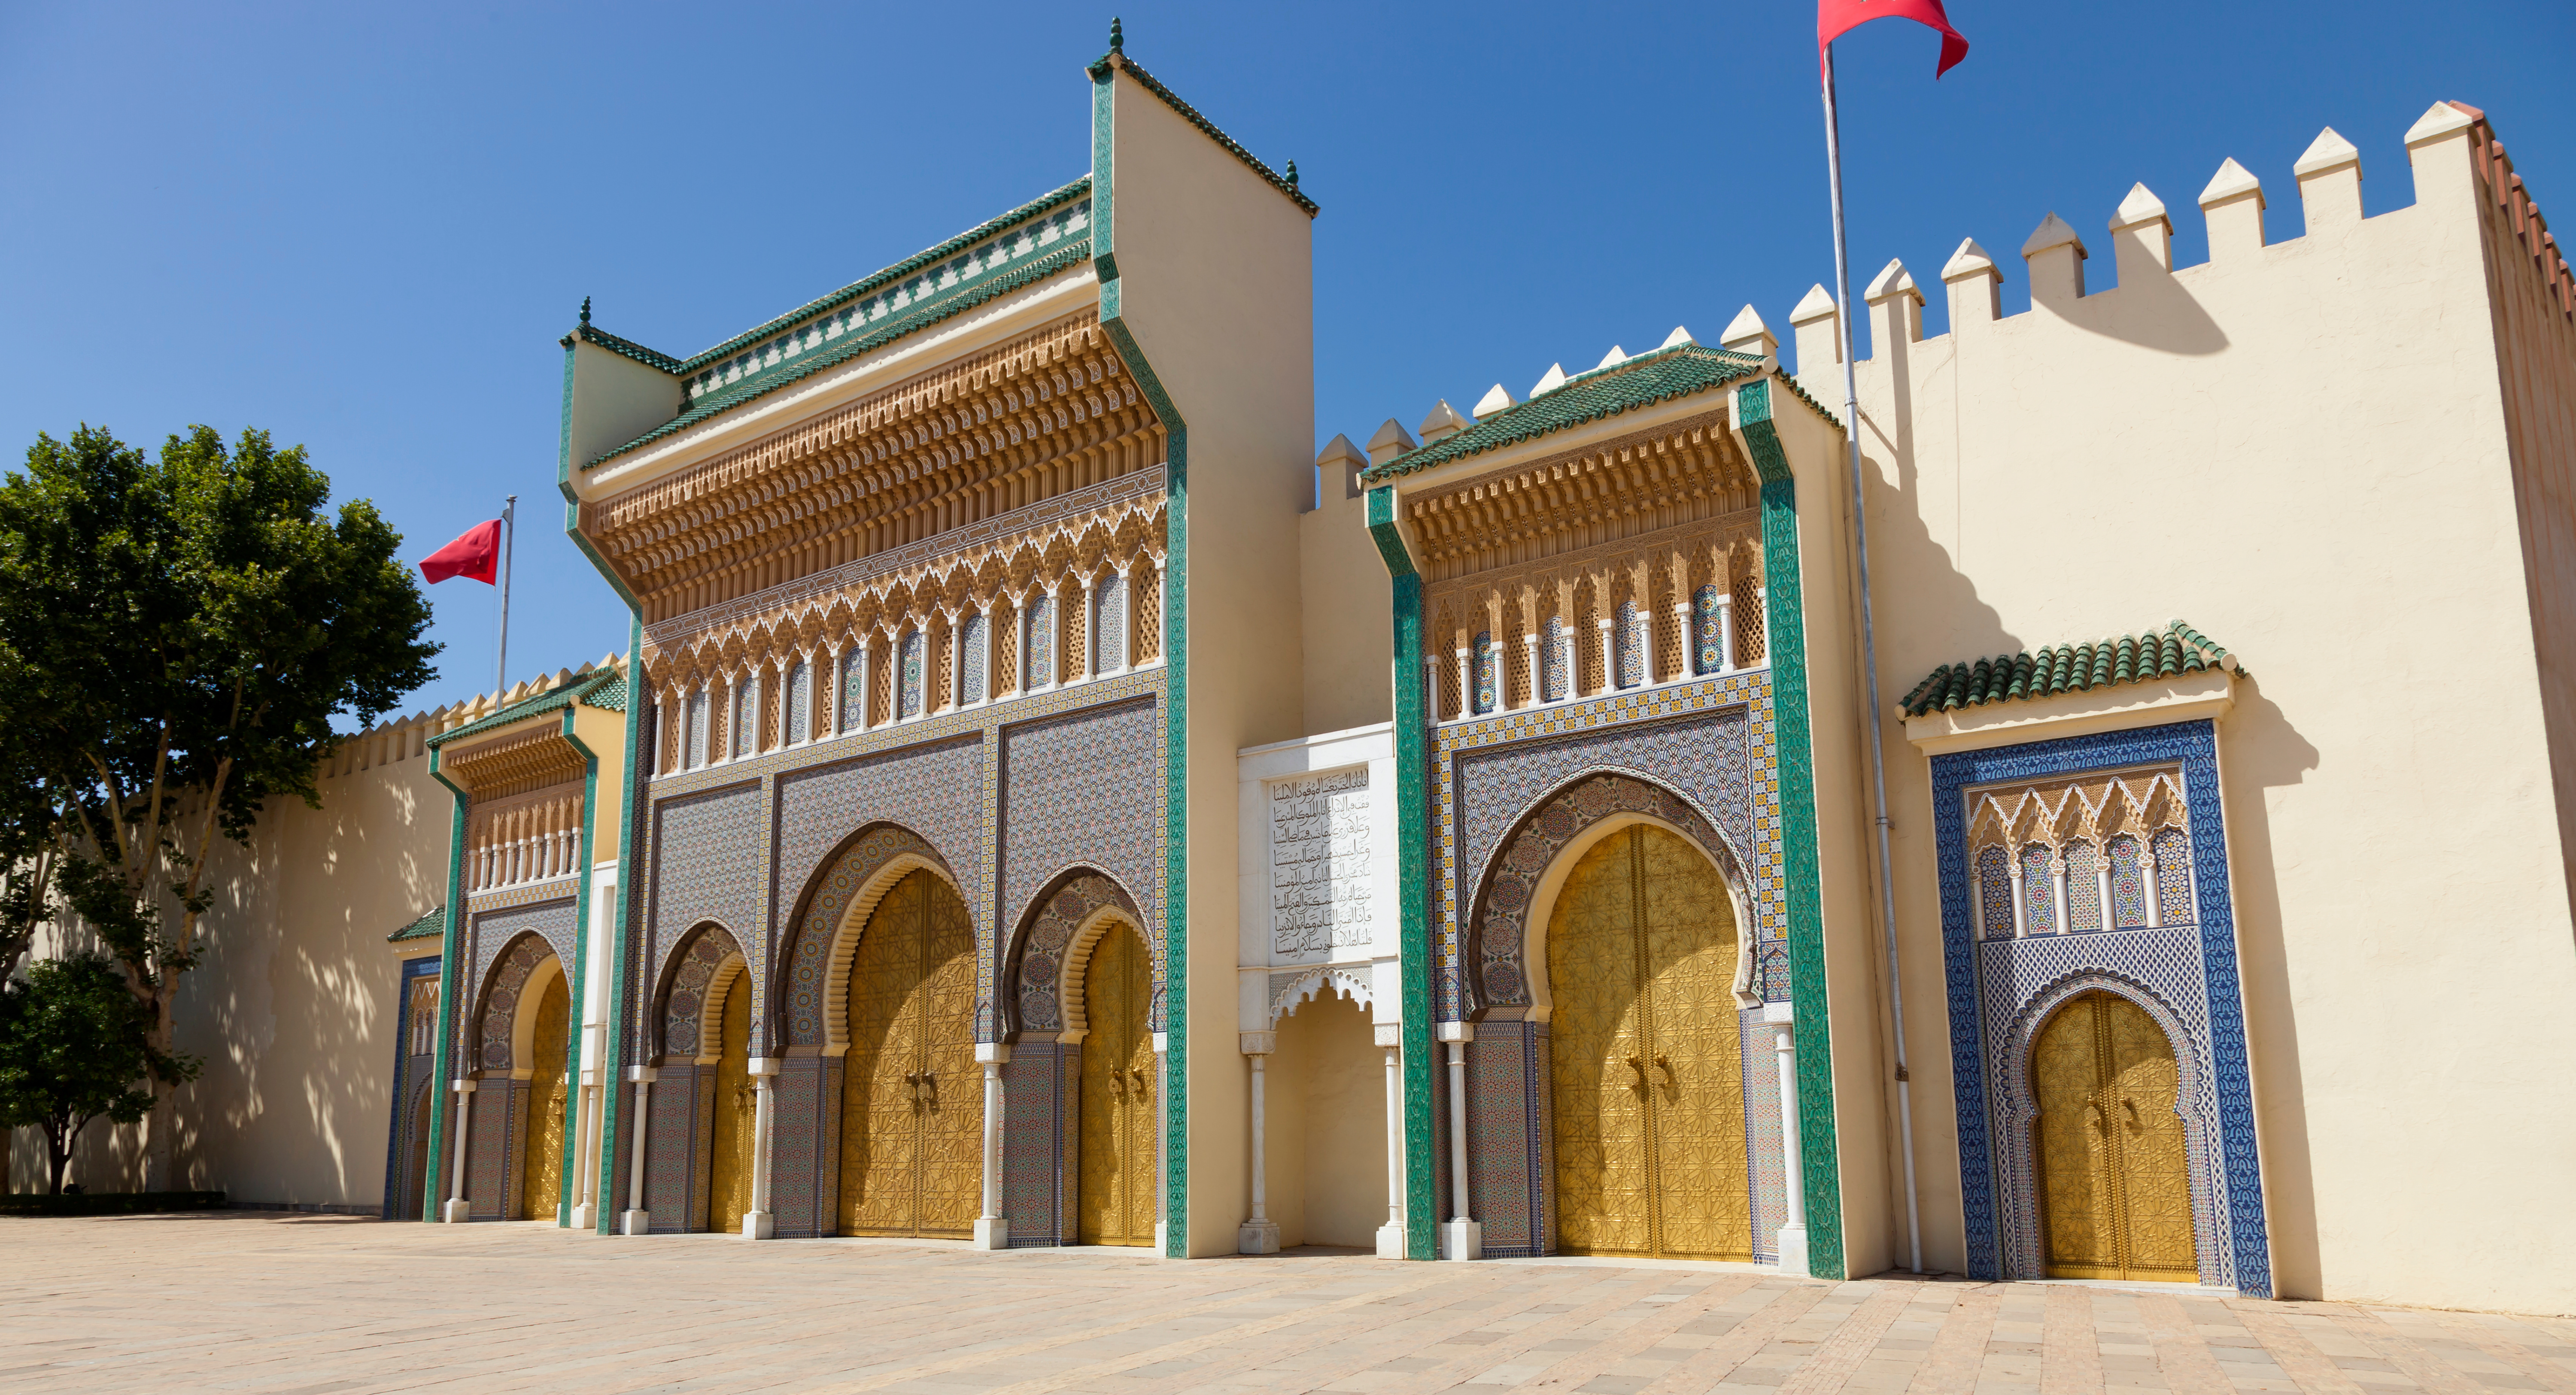 King's Palace of Fez